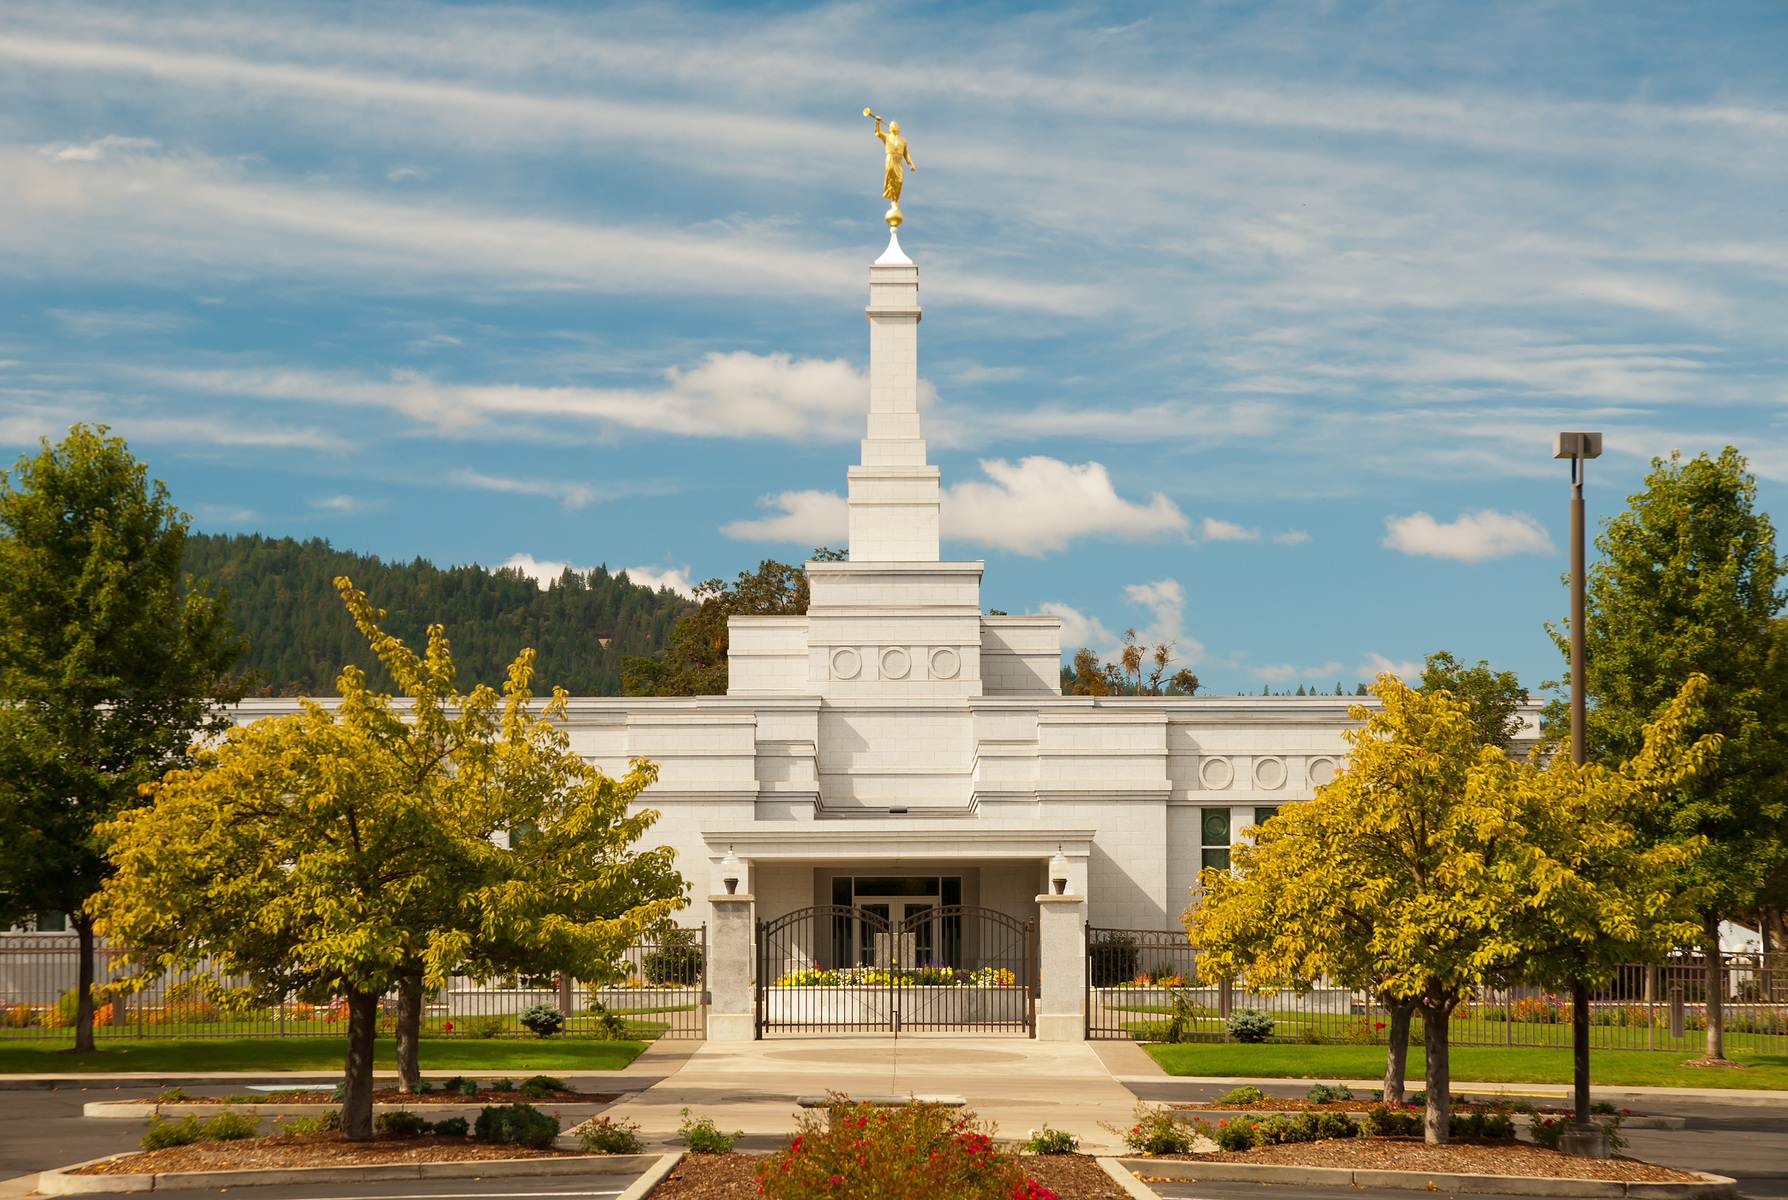 Medford Oregon Temple Photograph Gallery | ChurchofJesusChristTemples.org